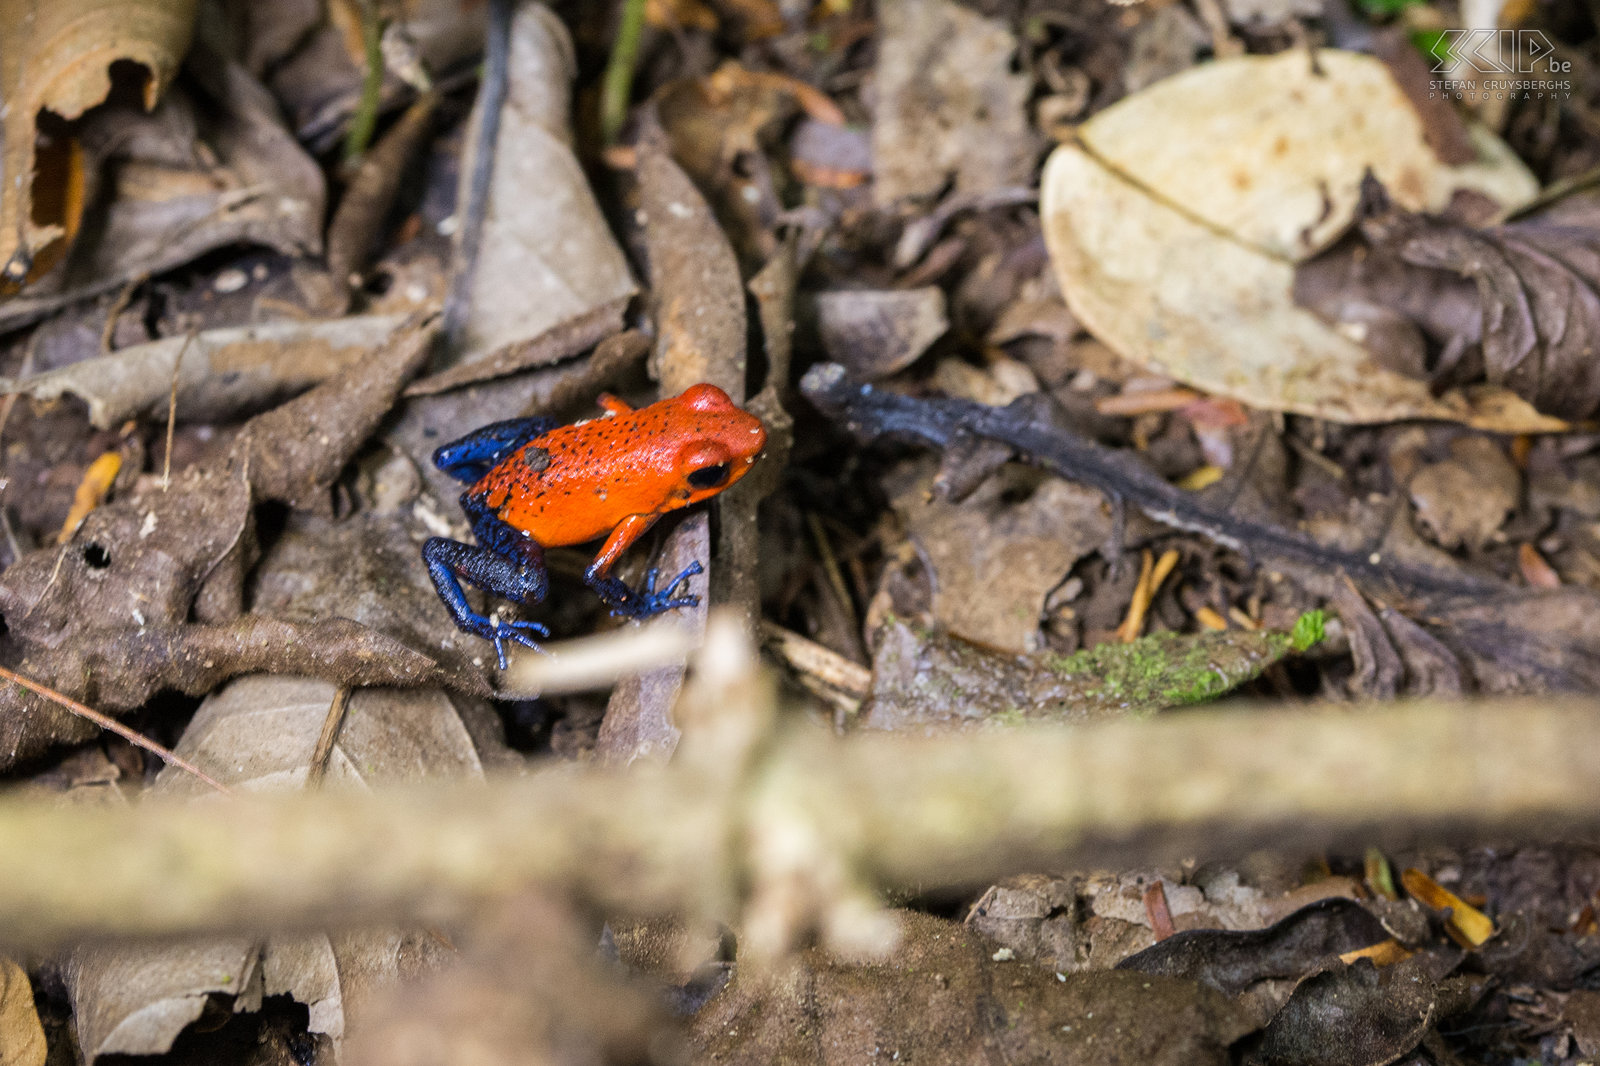 La Selva - Strawberry poison dart frog The strawberry poison-dart frog (oophaga pumilio or dendrobates pumilio) is a very small (1.7-2cm) and colorful but toxic  frog  which is often found in humid lowland forests. Stefan Cruysberghs